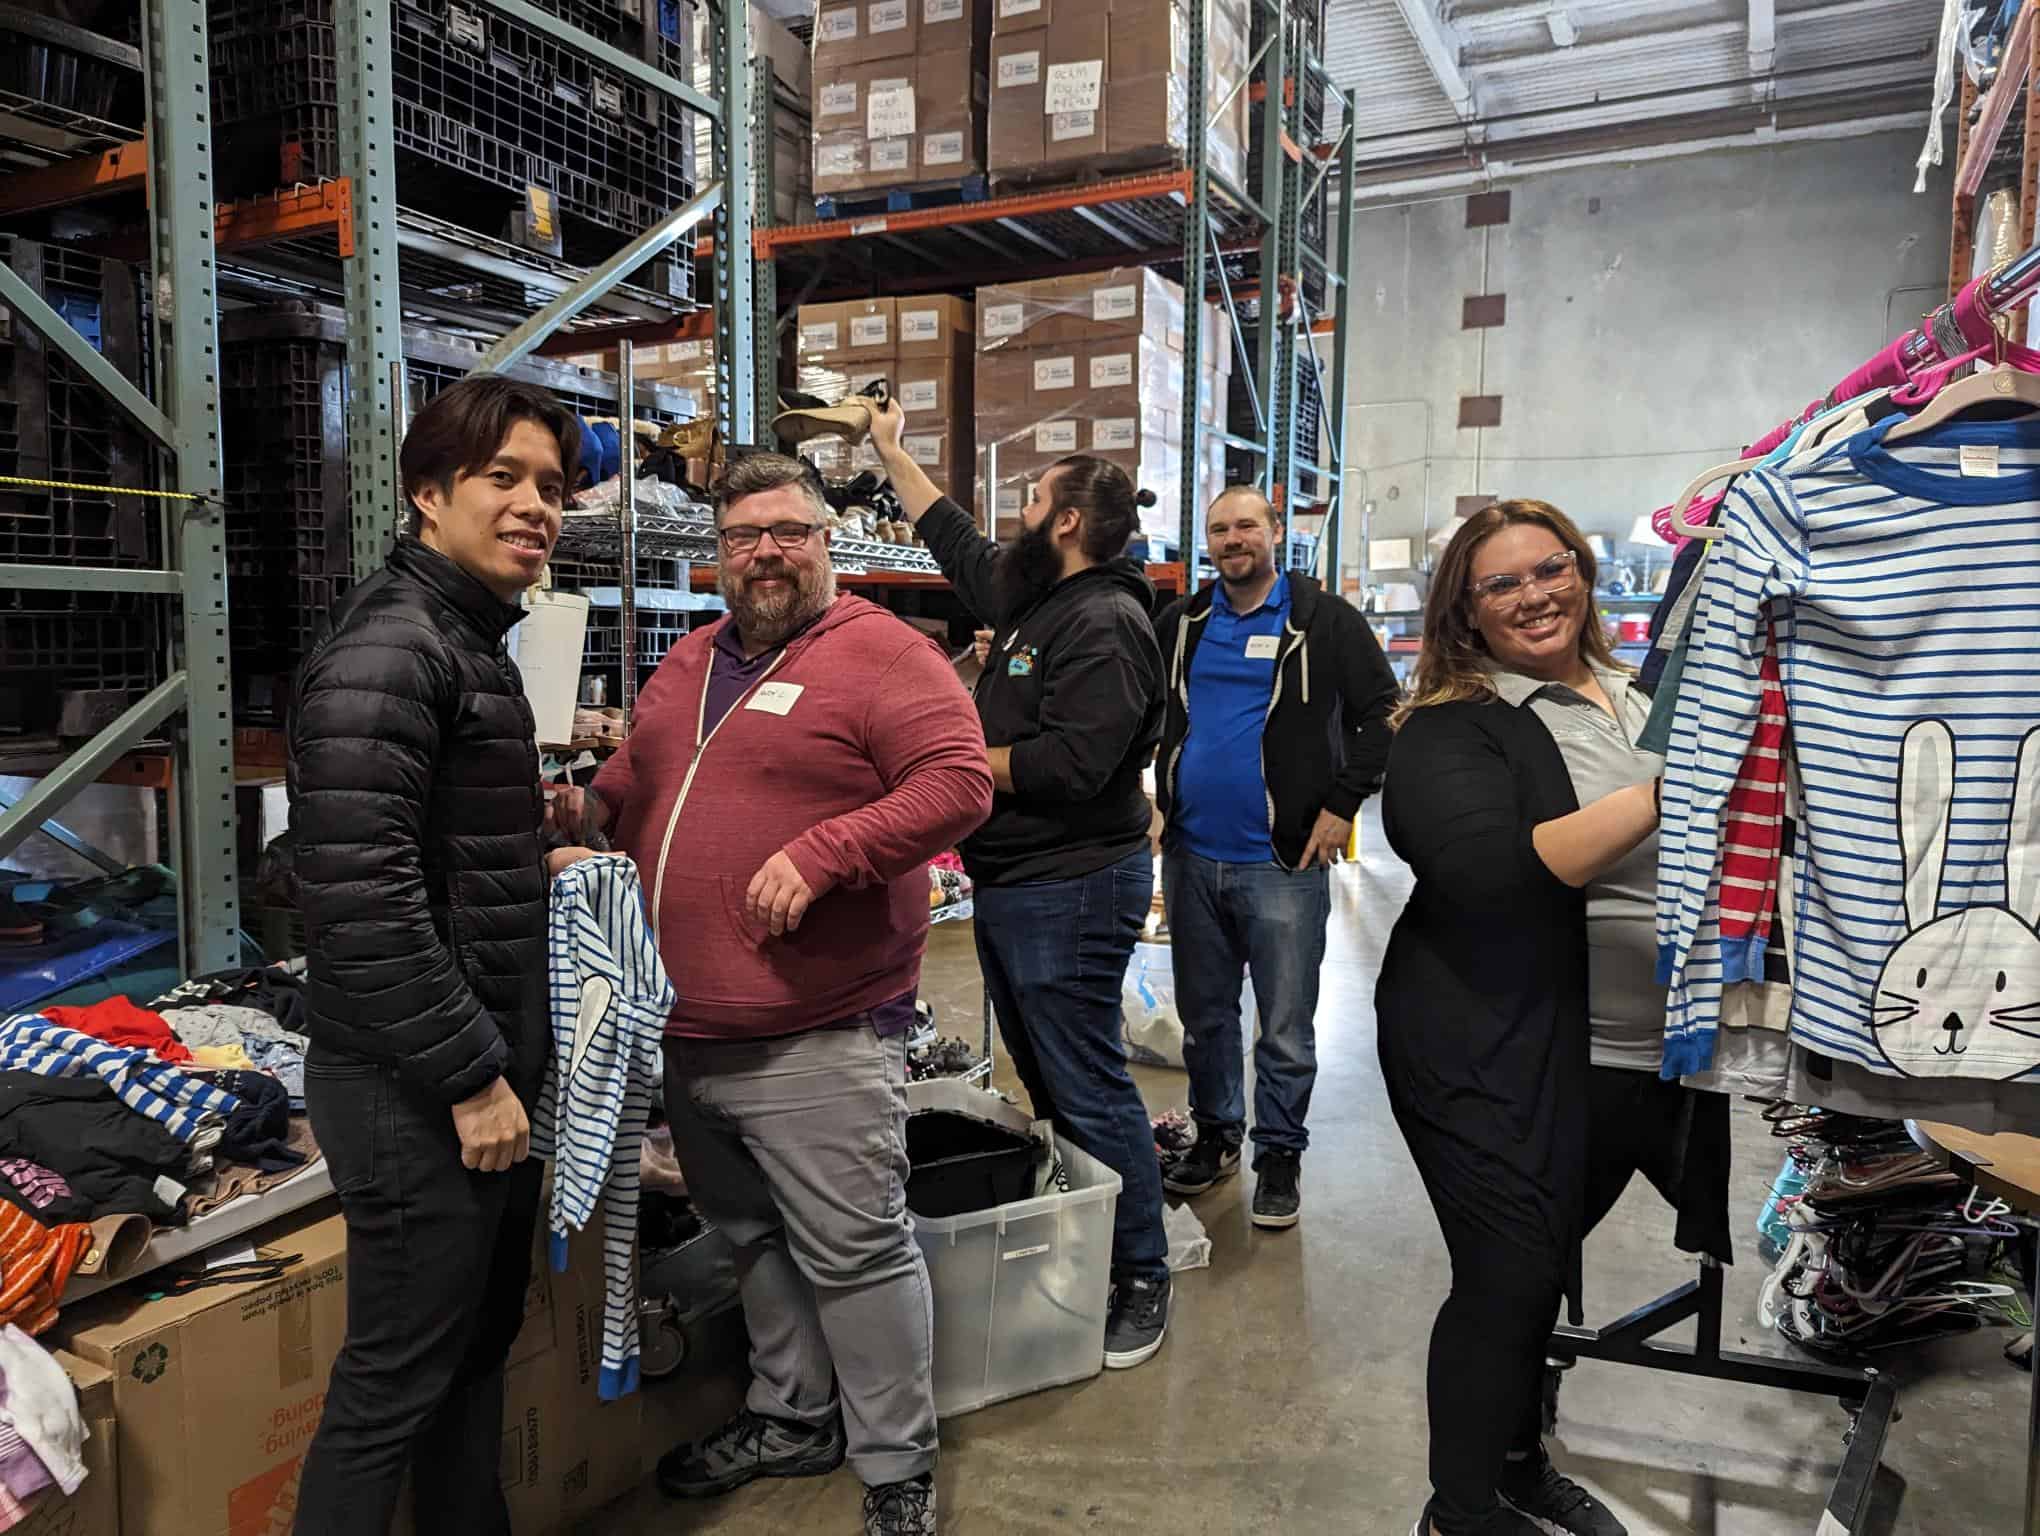 Group of people sorting out clothes in a warehouse